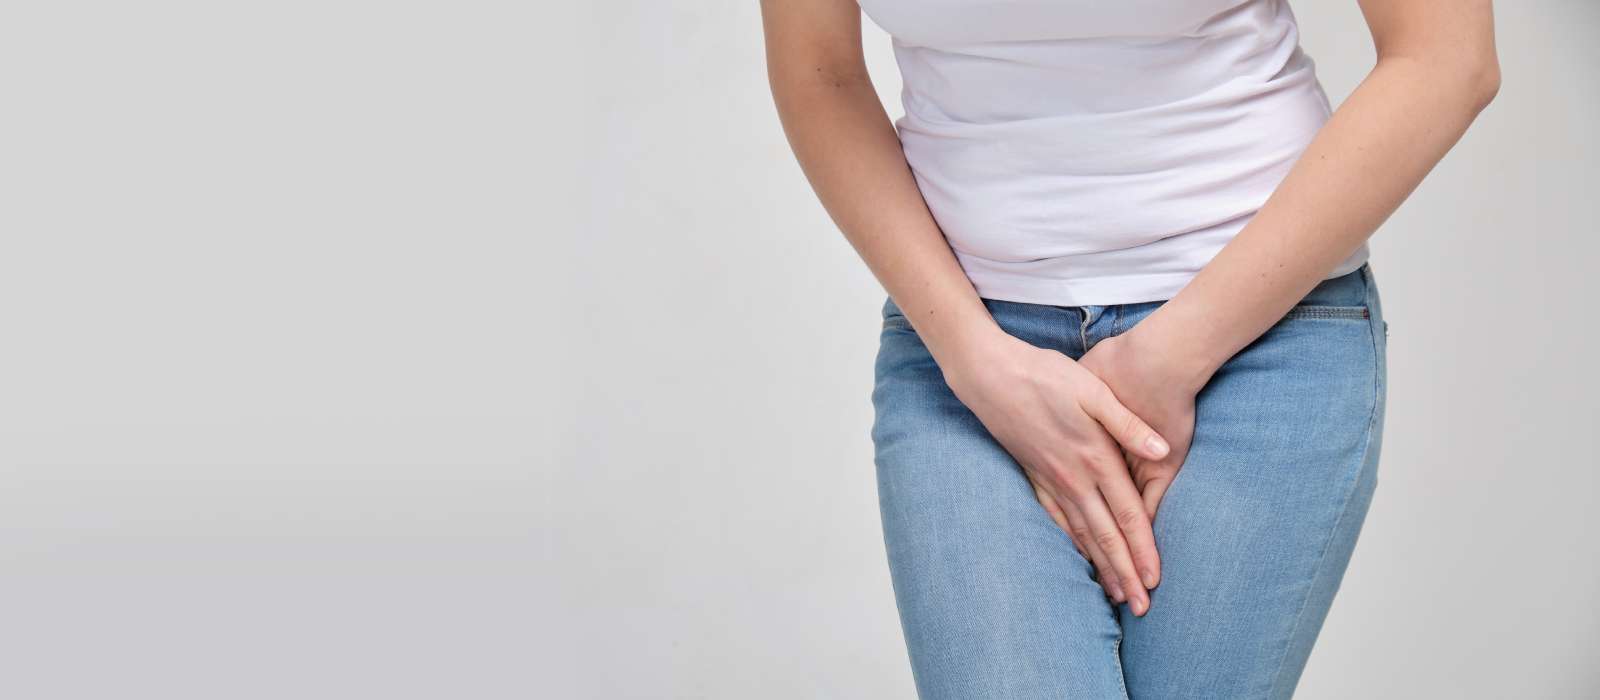 Urinary Incontinence Treatment in Hyderabad & India